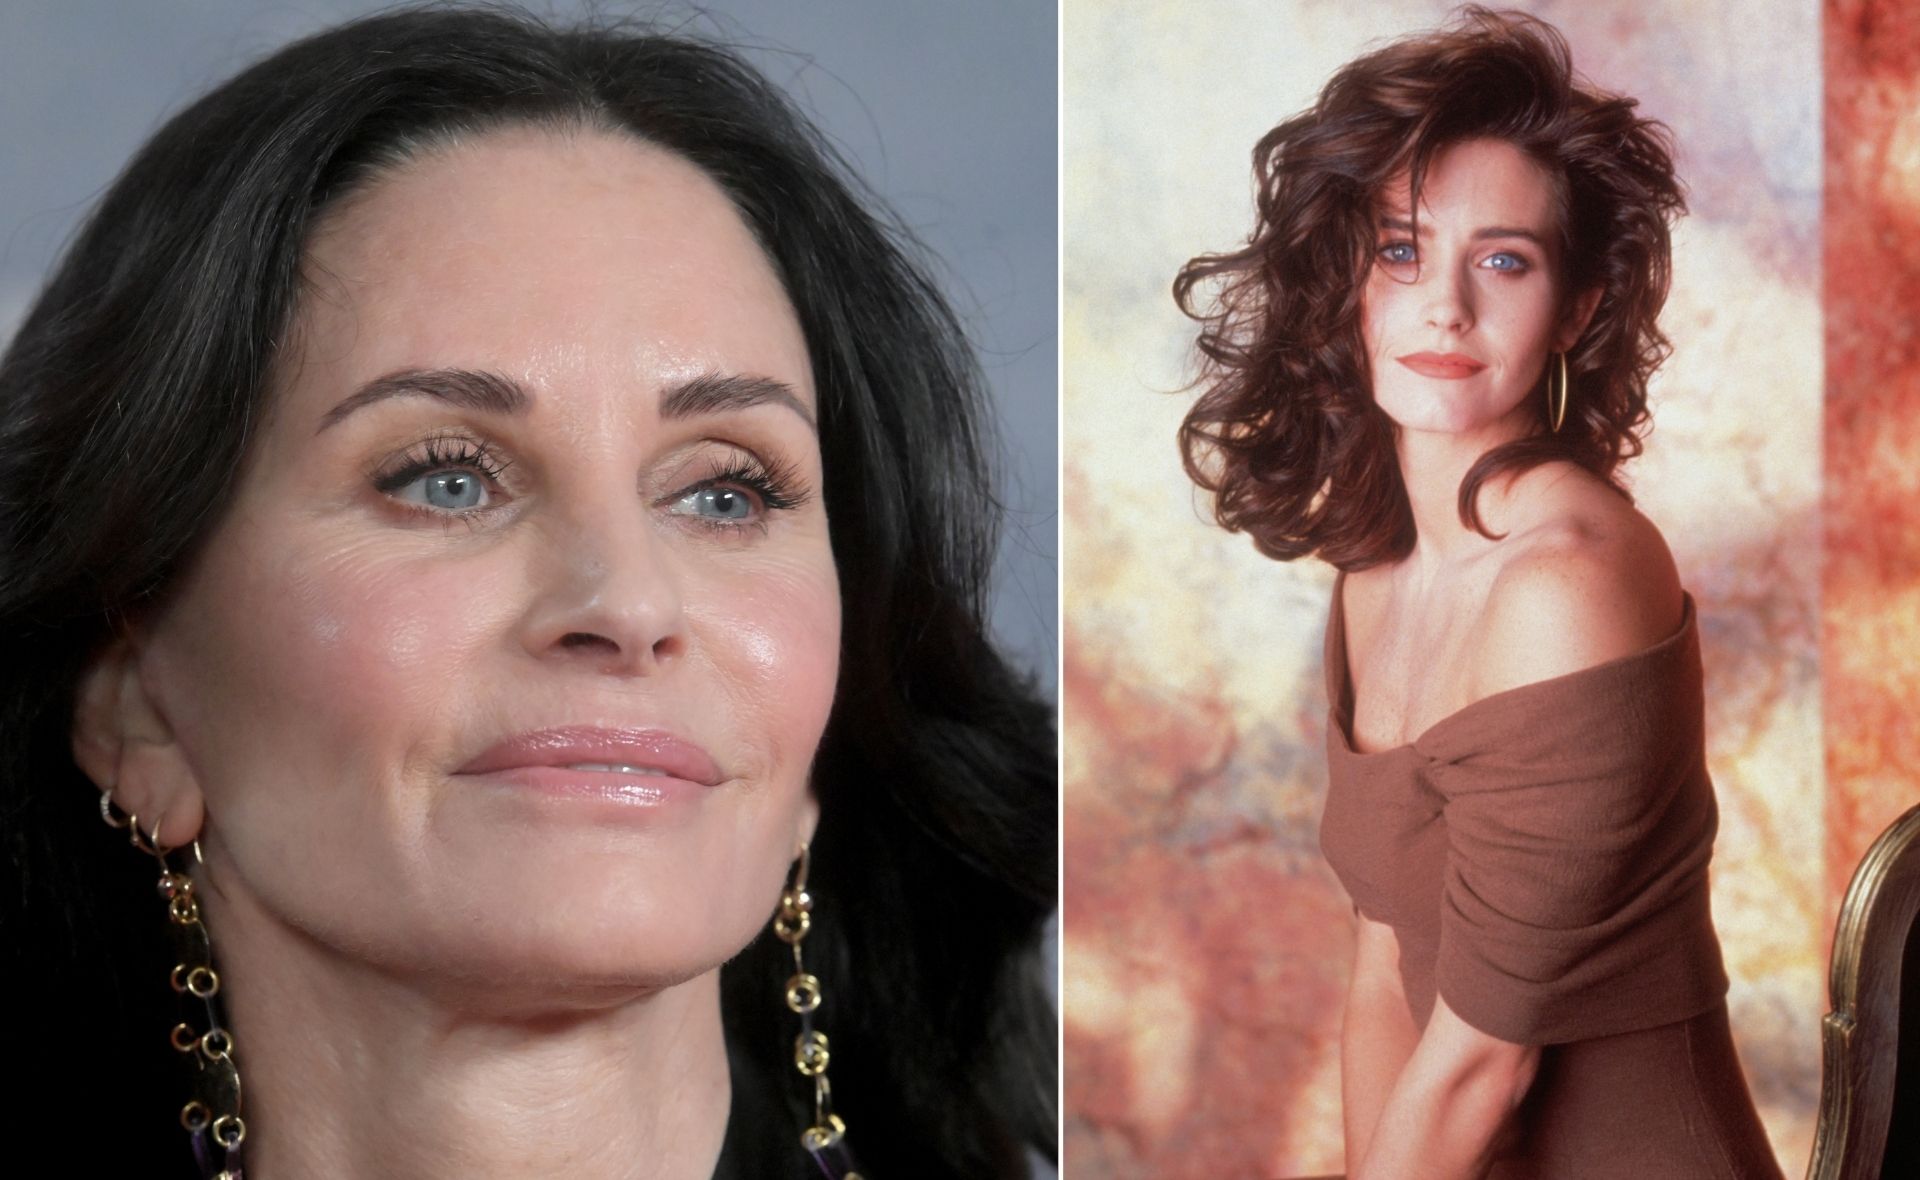 Courtney Cox isn’t afraid to admit that she went too far with plastic surgery